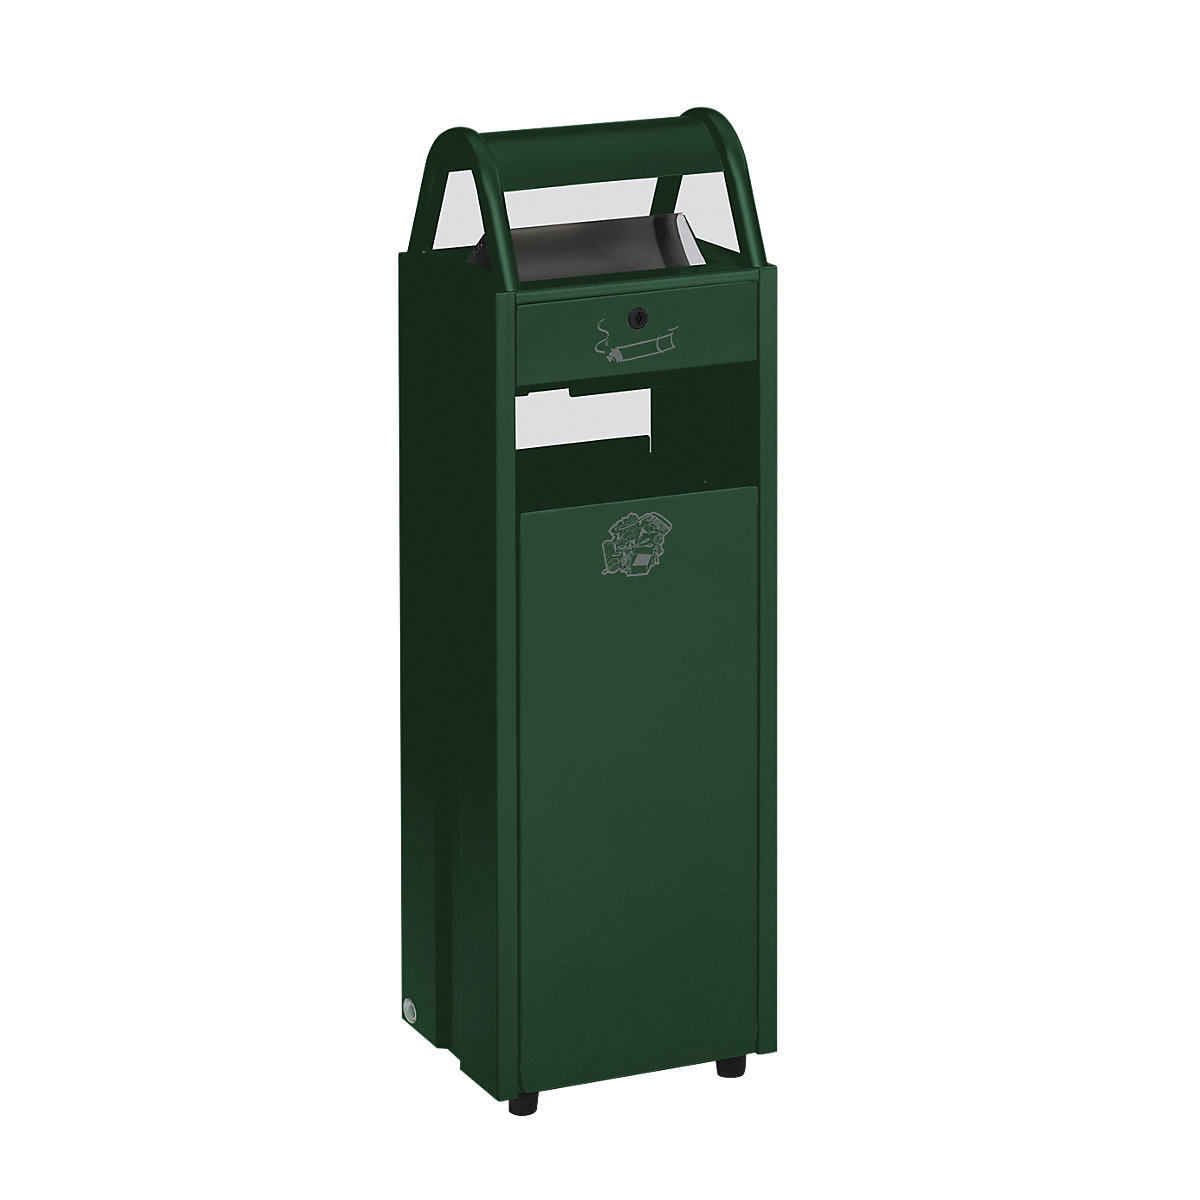 Waste collector with ashtray – VAR, capacity 35 l, WxHxD 300 x 960 x 250 mm, green RAL 6005-3